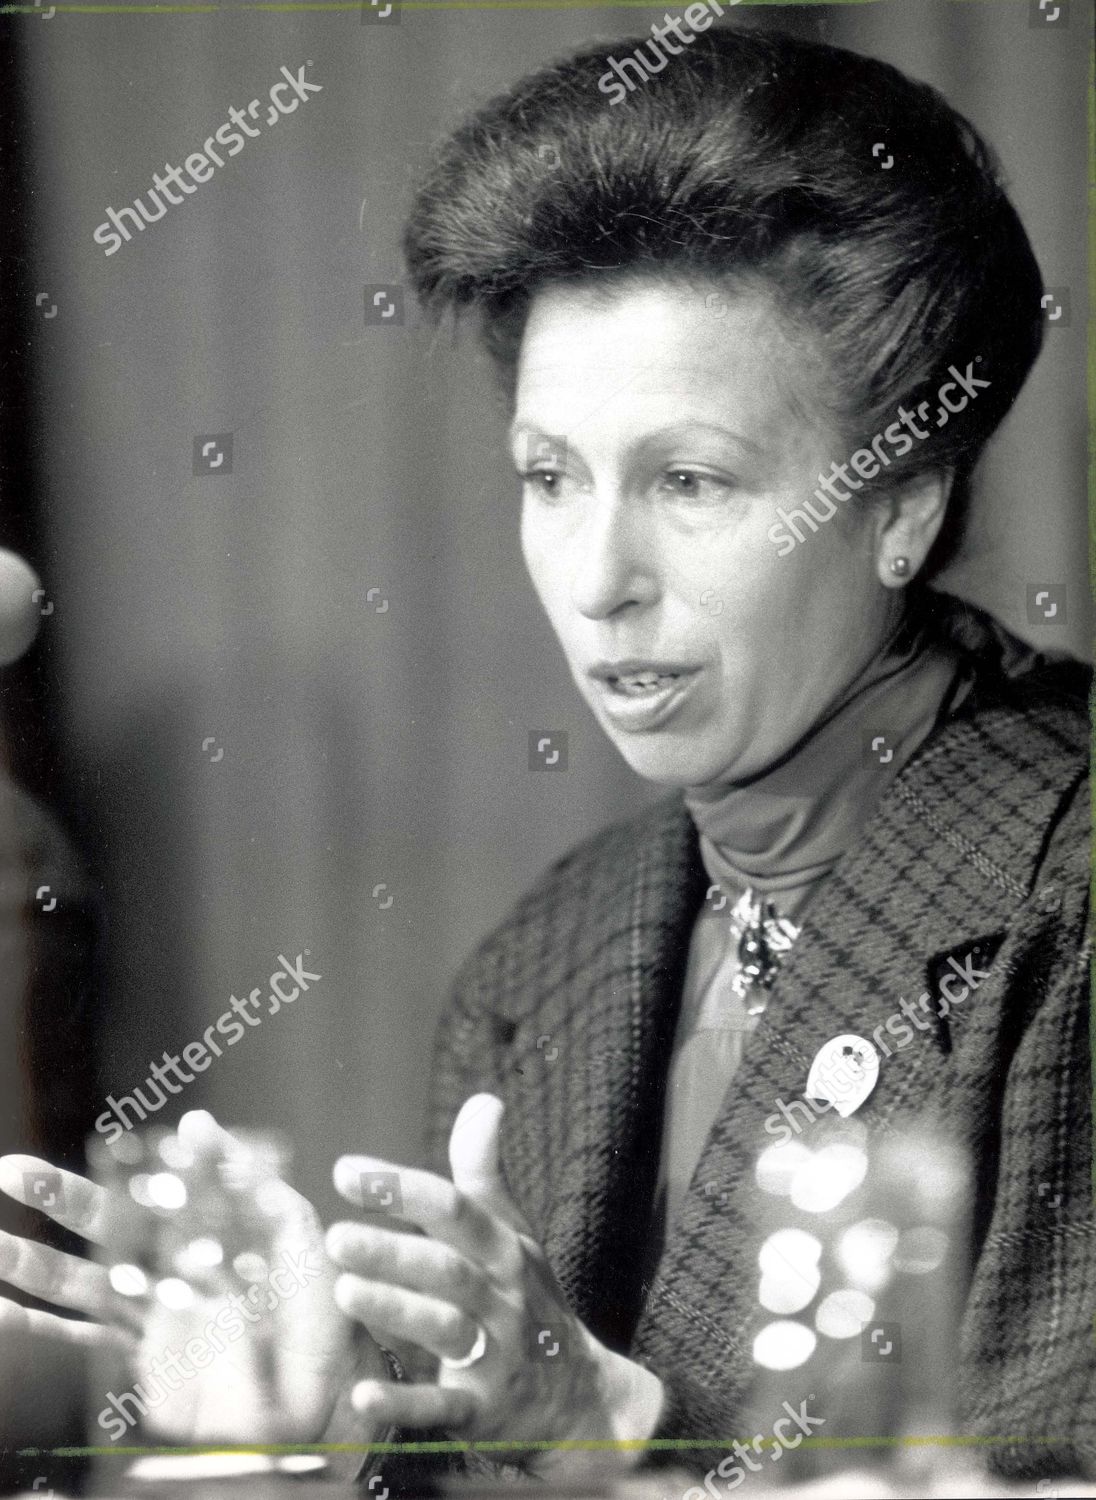 princess-anne-now-princess-royal-1989-picture-shows-the-princess-royal-making-a-point-at-wembley-during-her-call-for-greater-protection-for-horses-the-princess-royal-today-announced-new-safety-measures-to-protect-showjumping-dressage-and-three-d-shutterstock-editorial-930447a.jpg